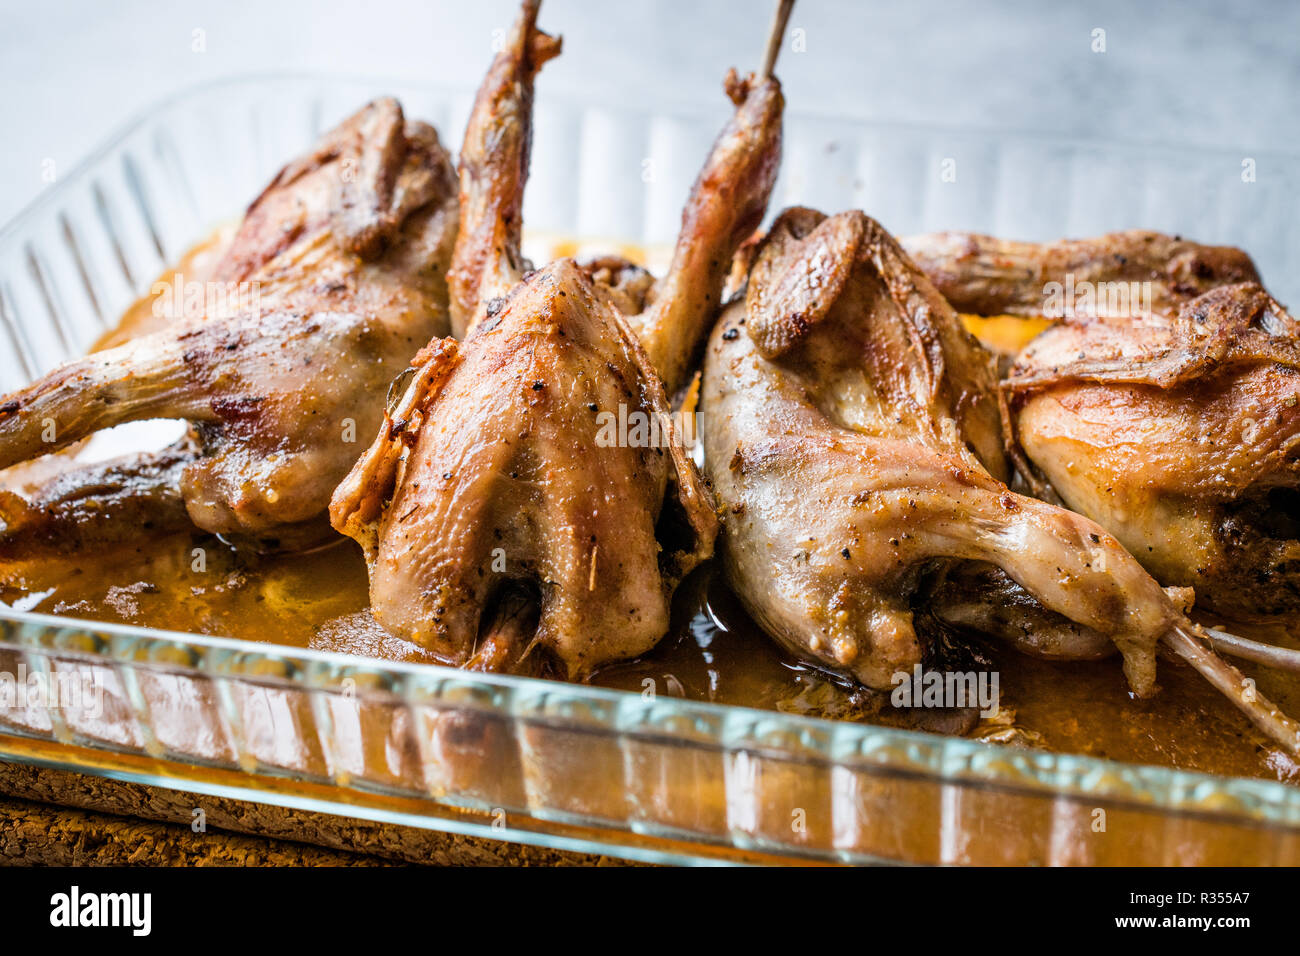 Roasted Crispy Quail Meat in Glass Bowl / Fried Small Chickens. Organic Food. Stock Photo